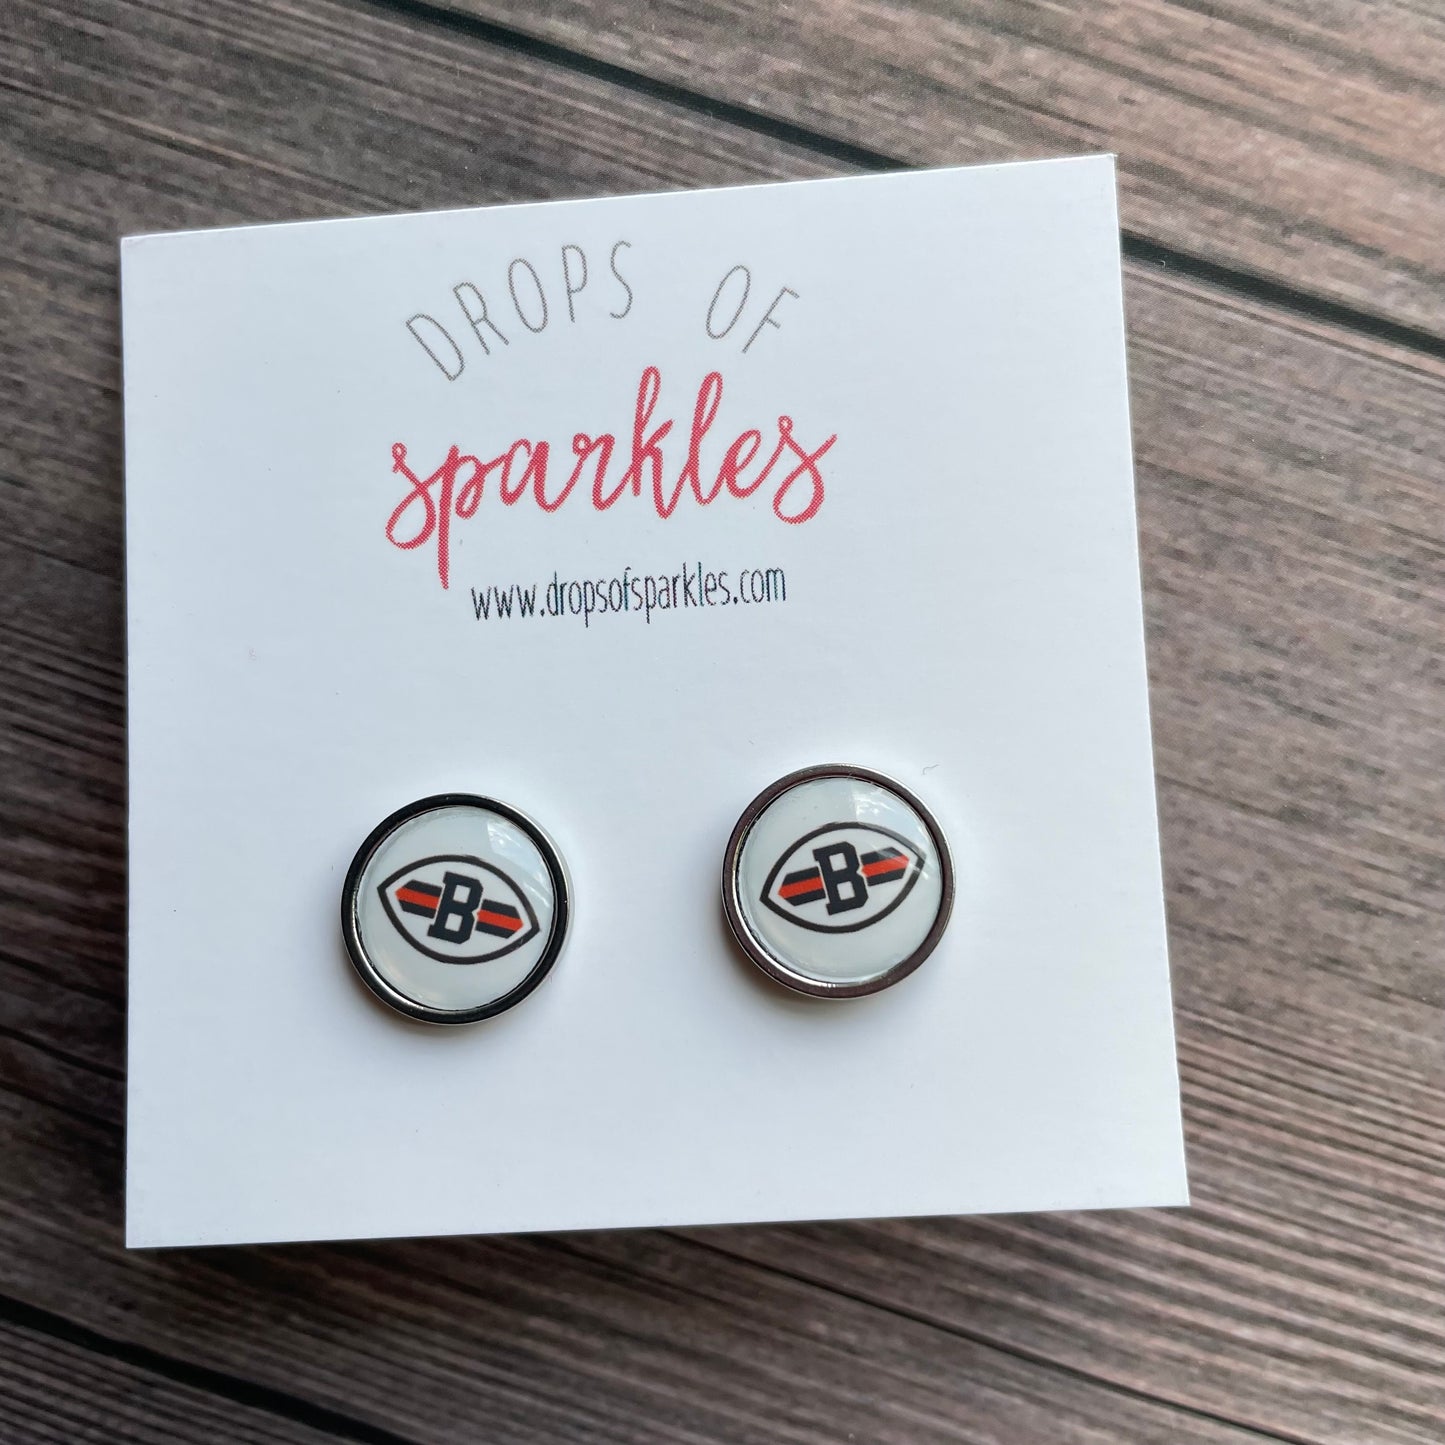 Cleveland Browns stud earrings